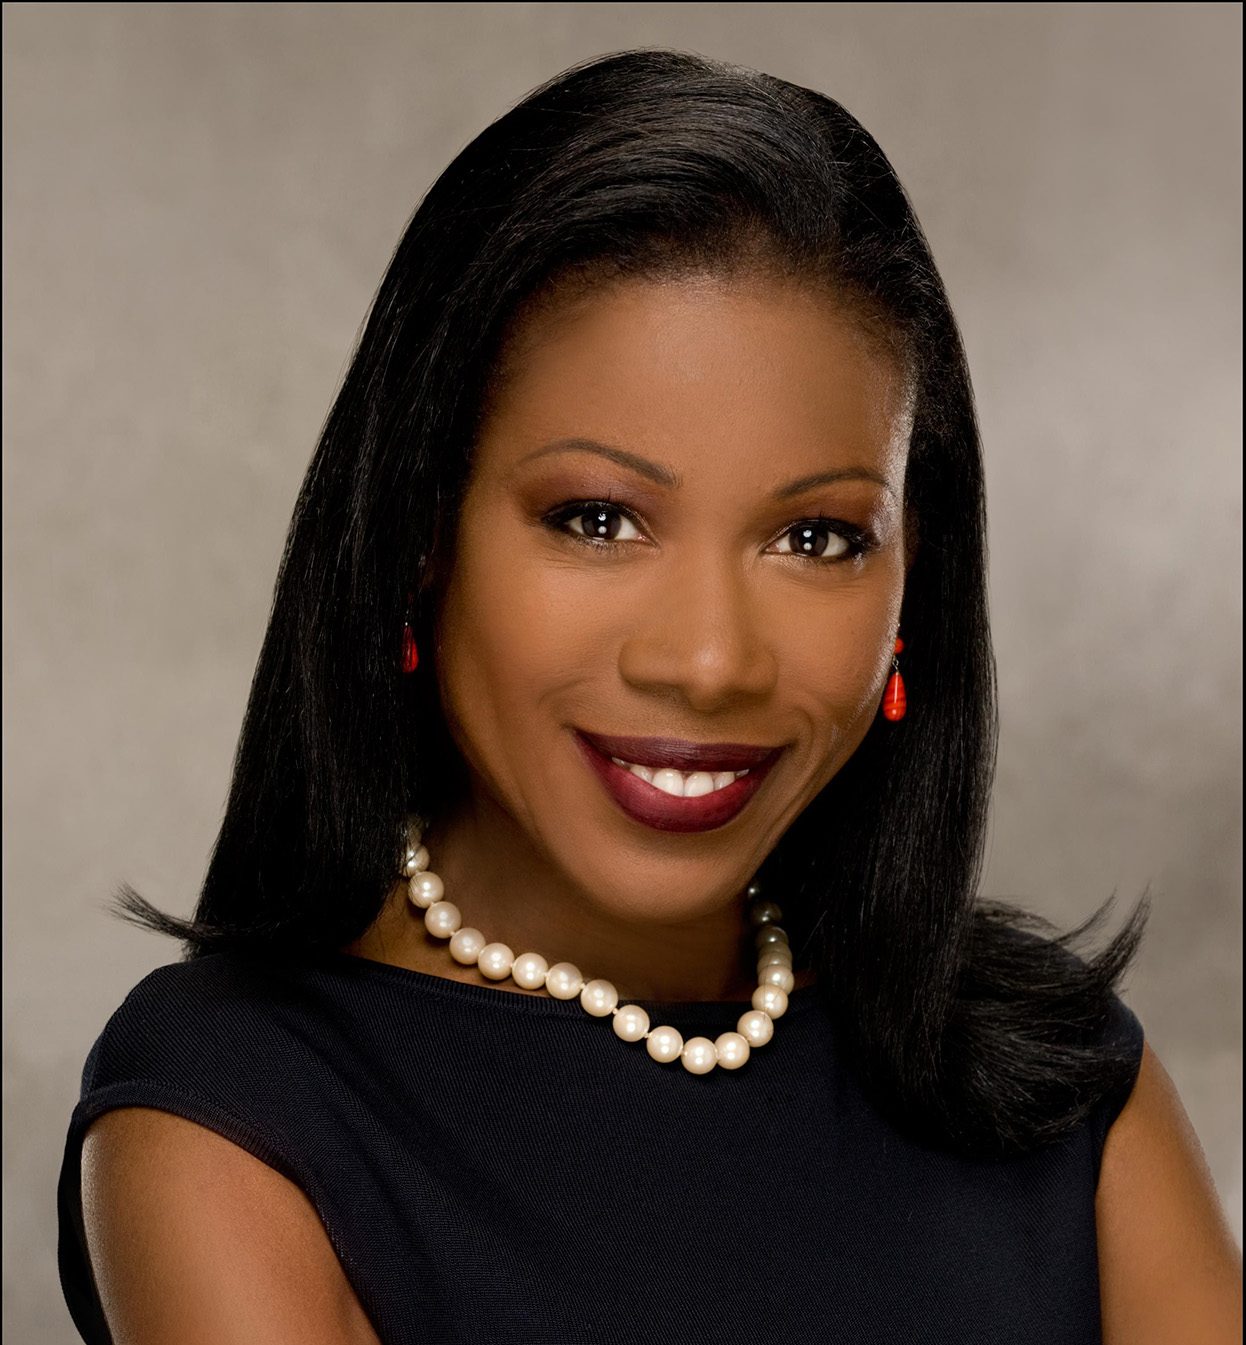 Author Isabel Wilkerson uses a metaphor of an inherited house